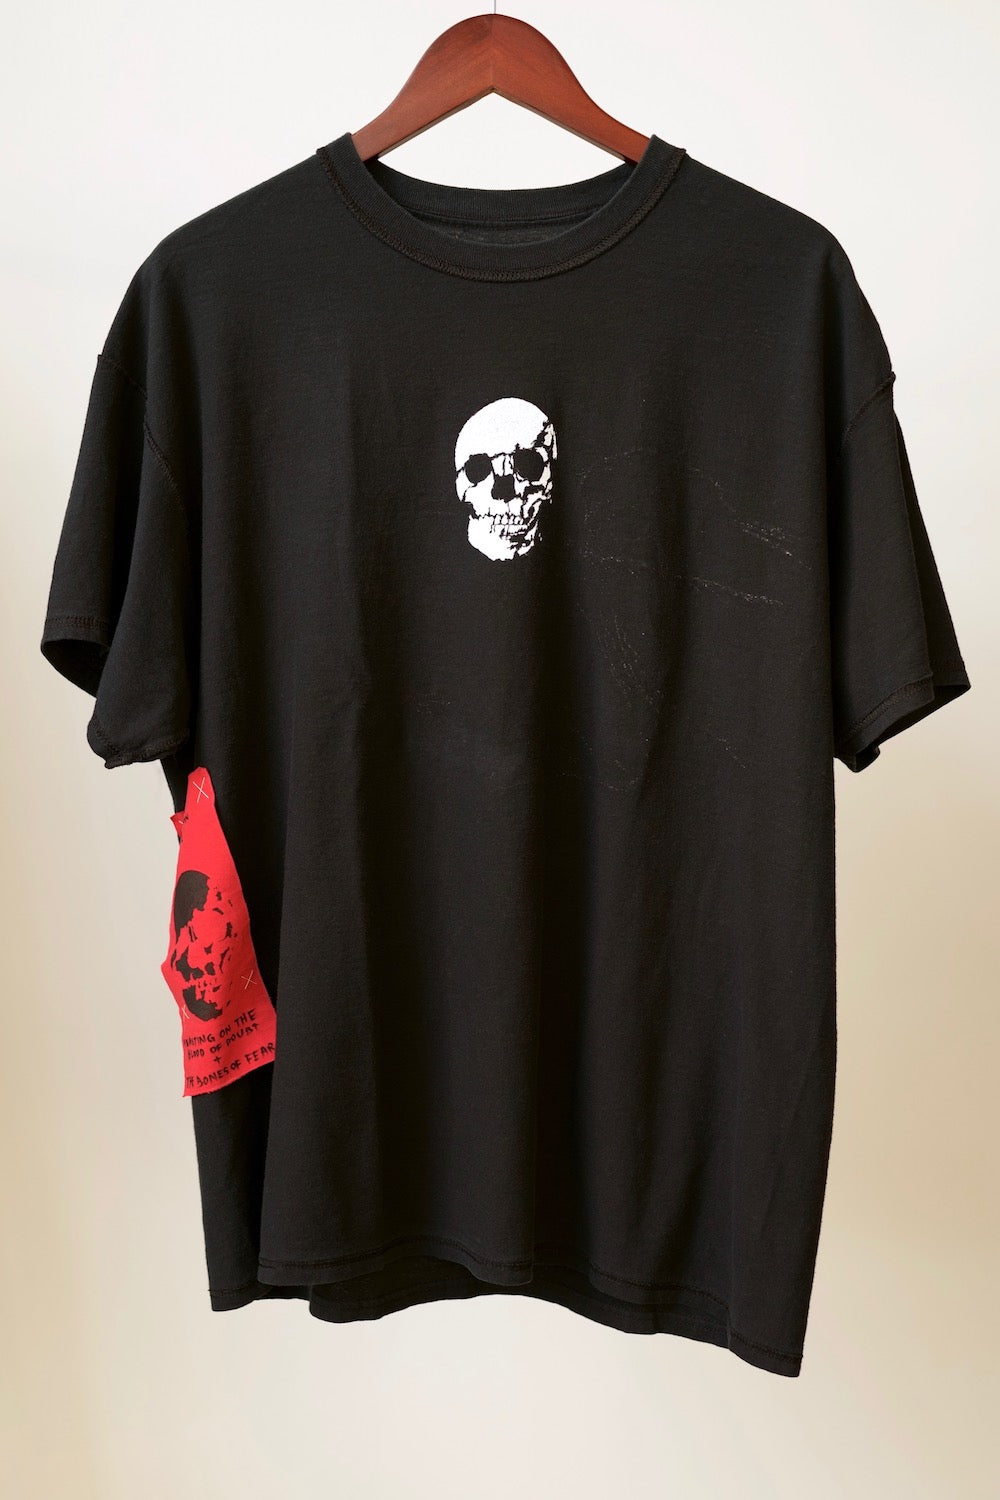 WSL Customized Vintage Reversible "Hell Rider" T-Shirt